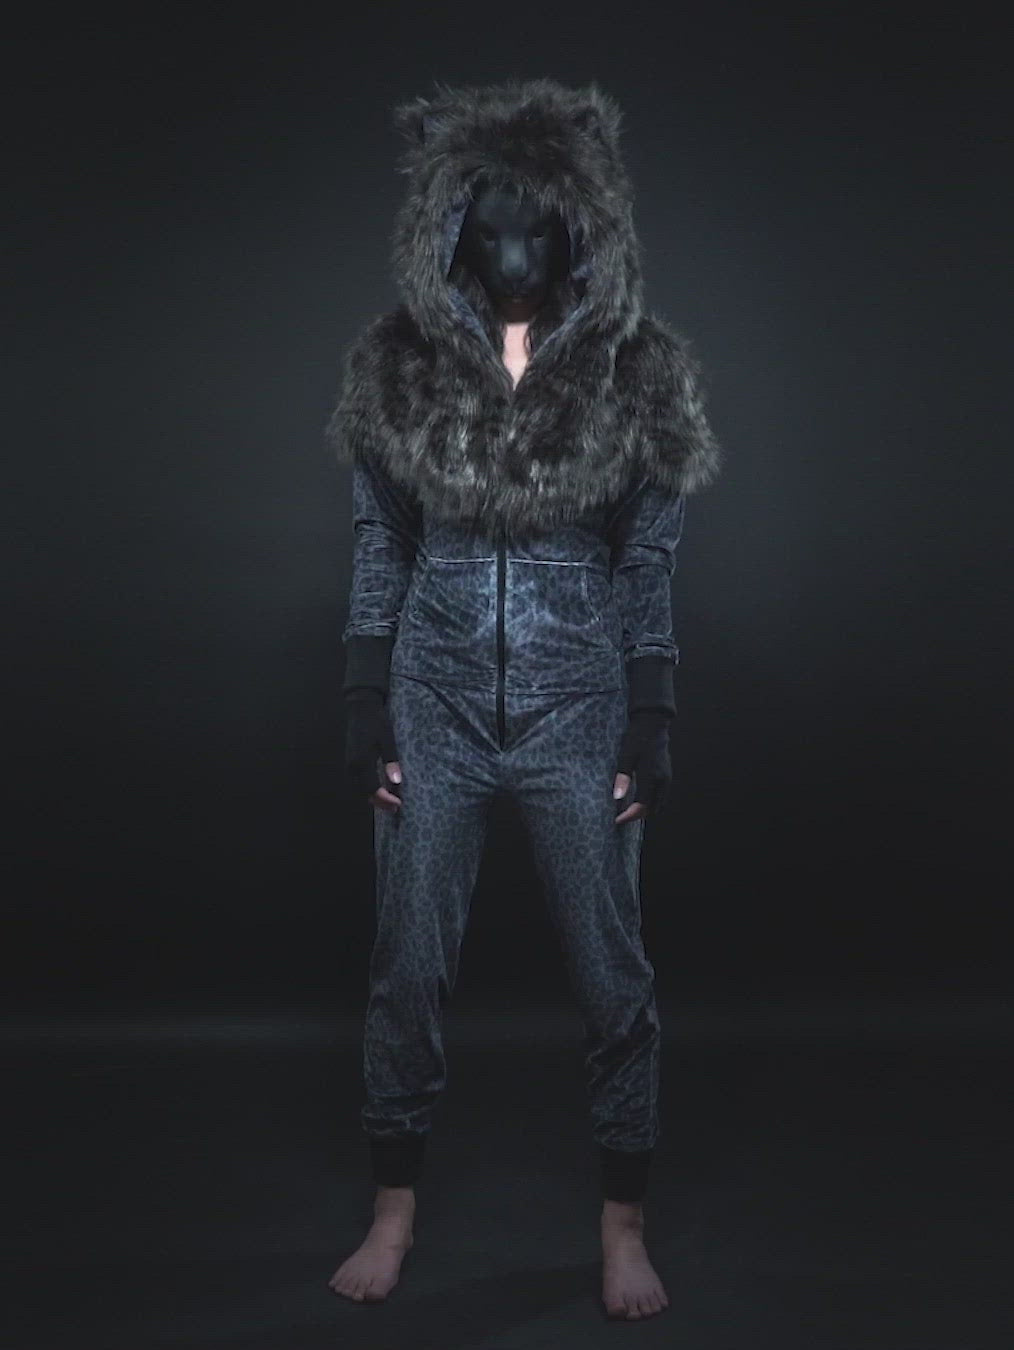 Video of Model Wearing Mask and Showing Features of the Black Panther Faux Fur Onesie